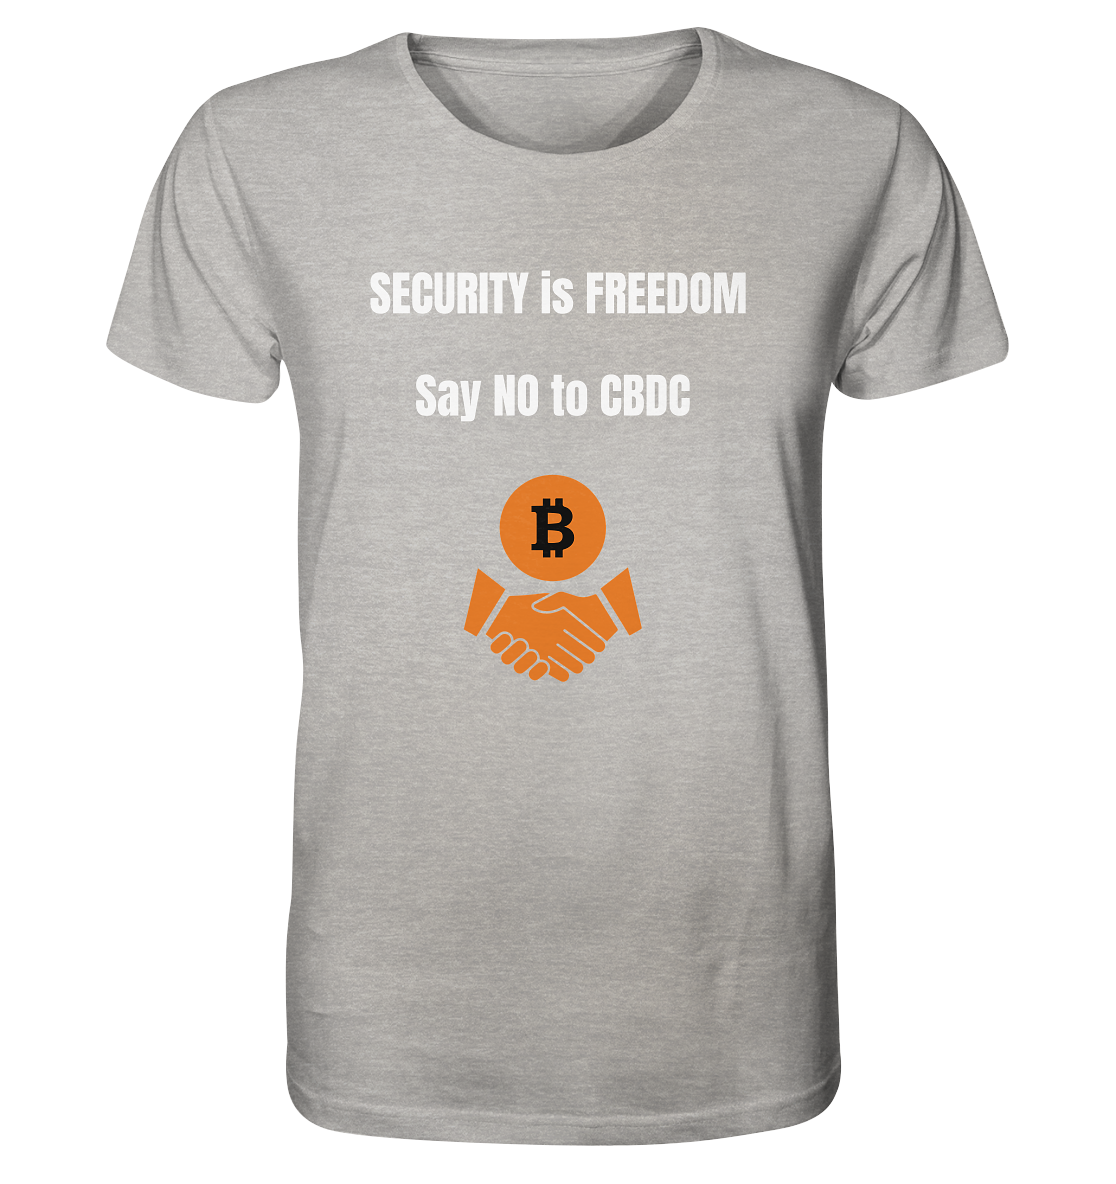 SECURITY is FREEDOM - say NO to CBDC  - Organic Shirt (meliert)